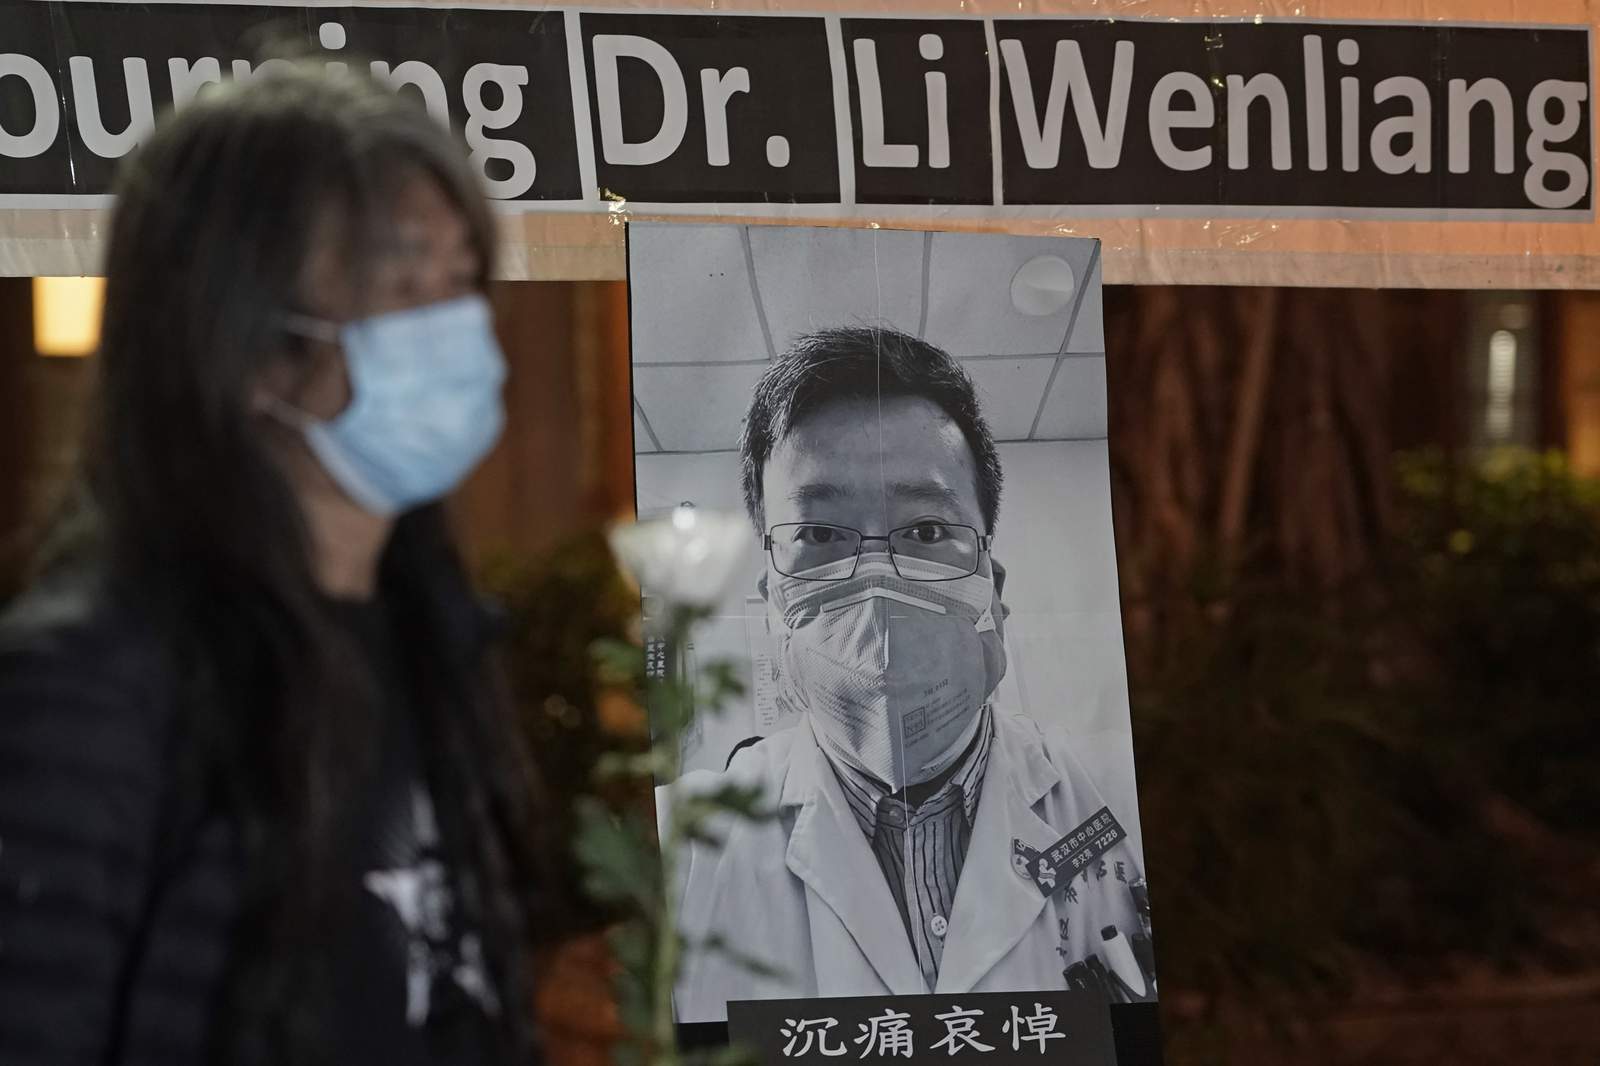 Doctor’s death highlights dangers on front lines of outbreak